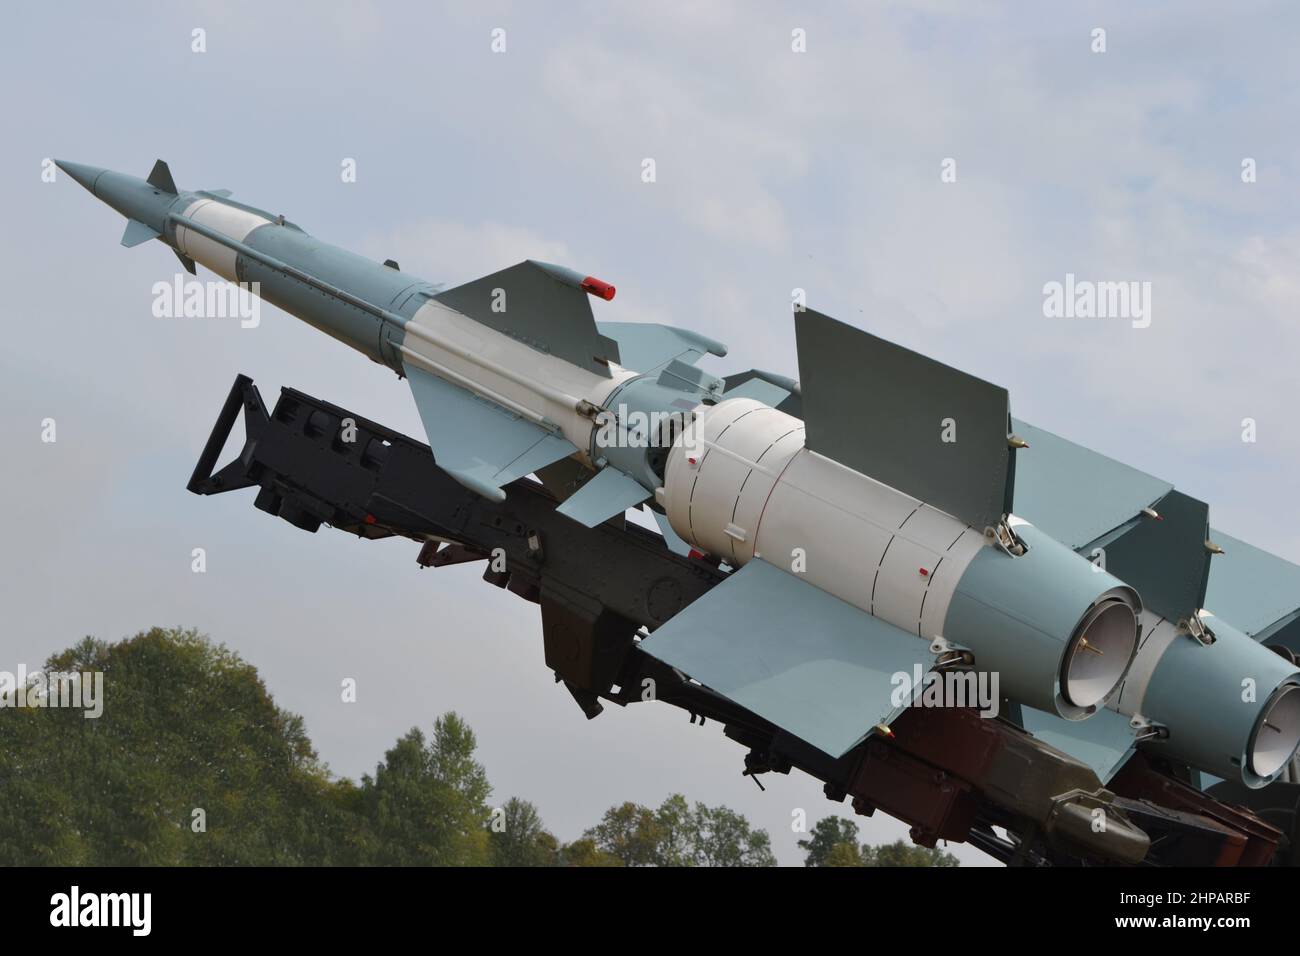 Radom, Mazowieckie, Poland - August 23th, 2015: Anti-aircraft cruise missles on a launcher Stock Photo